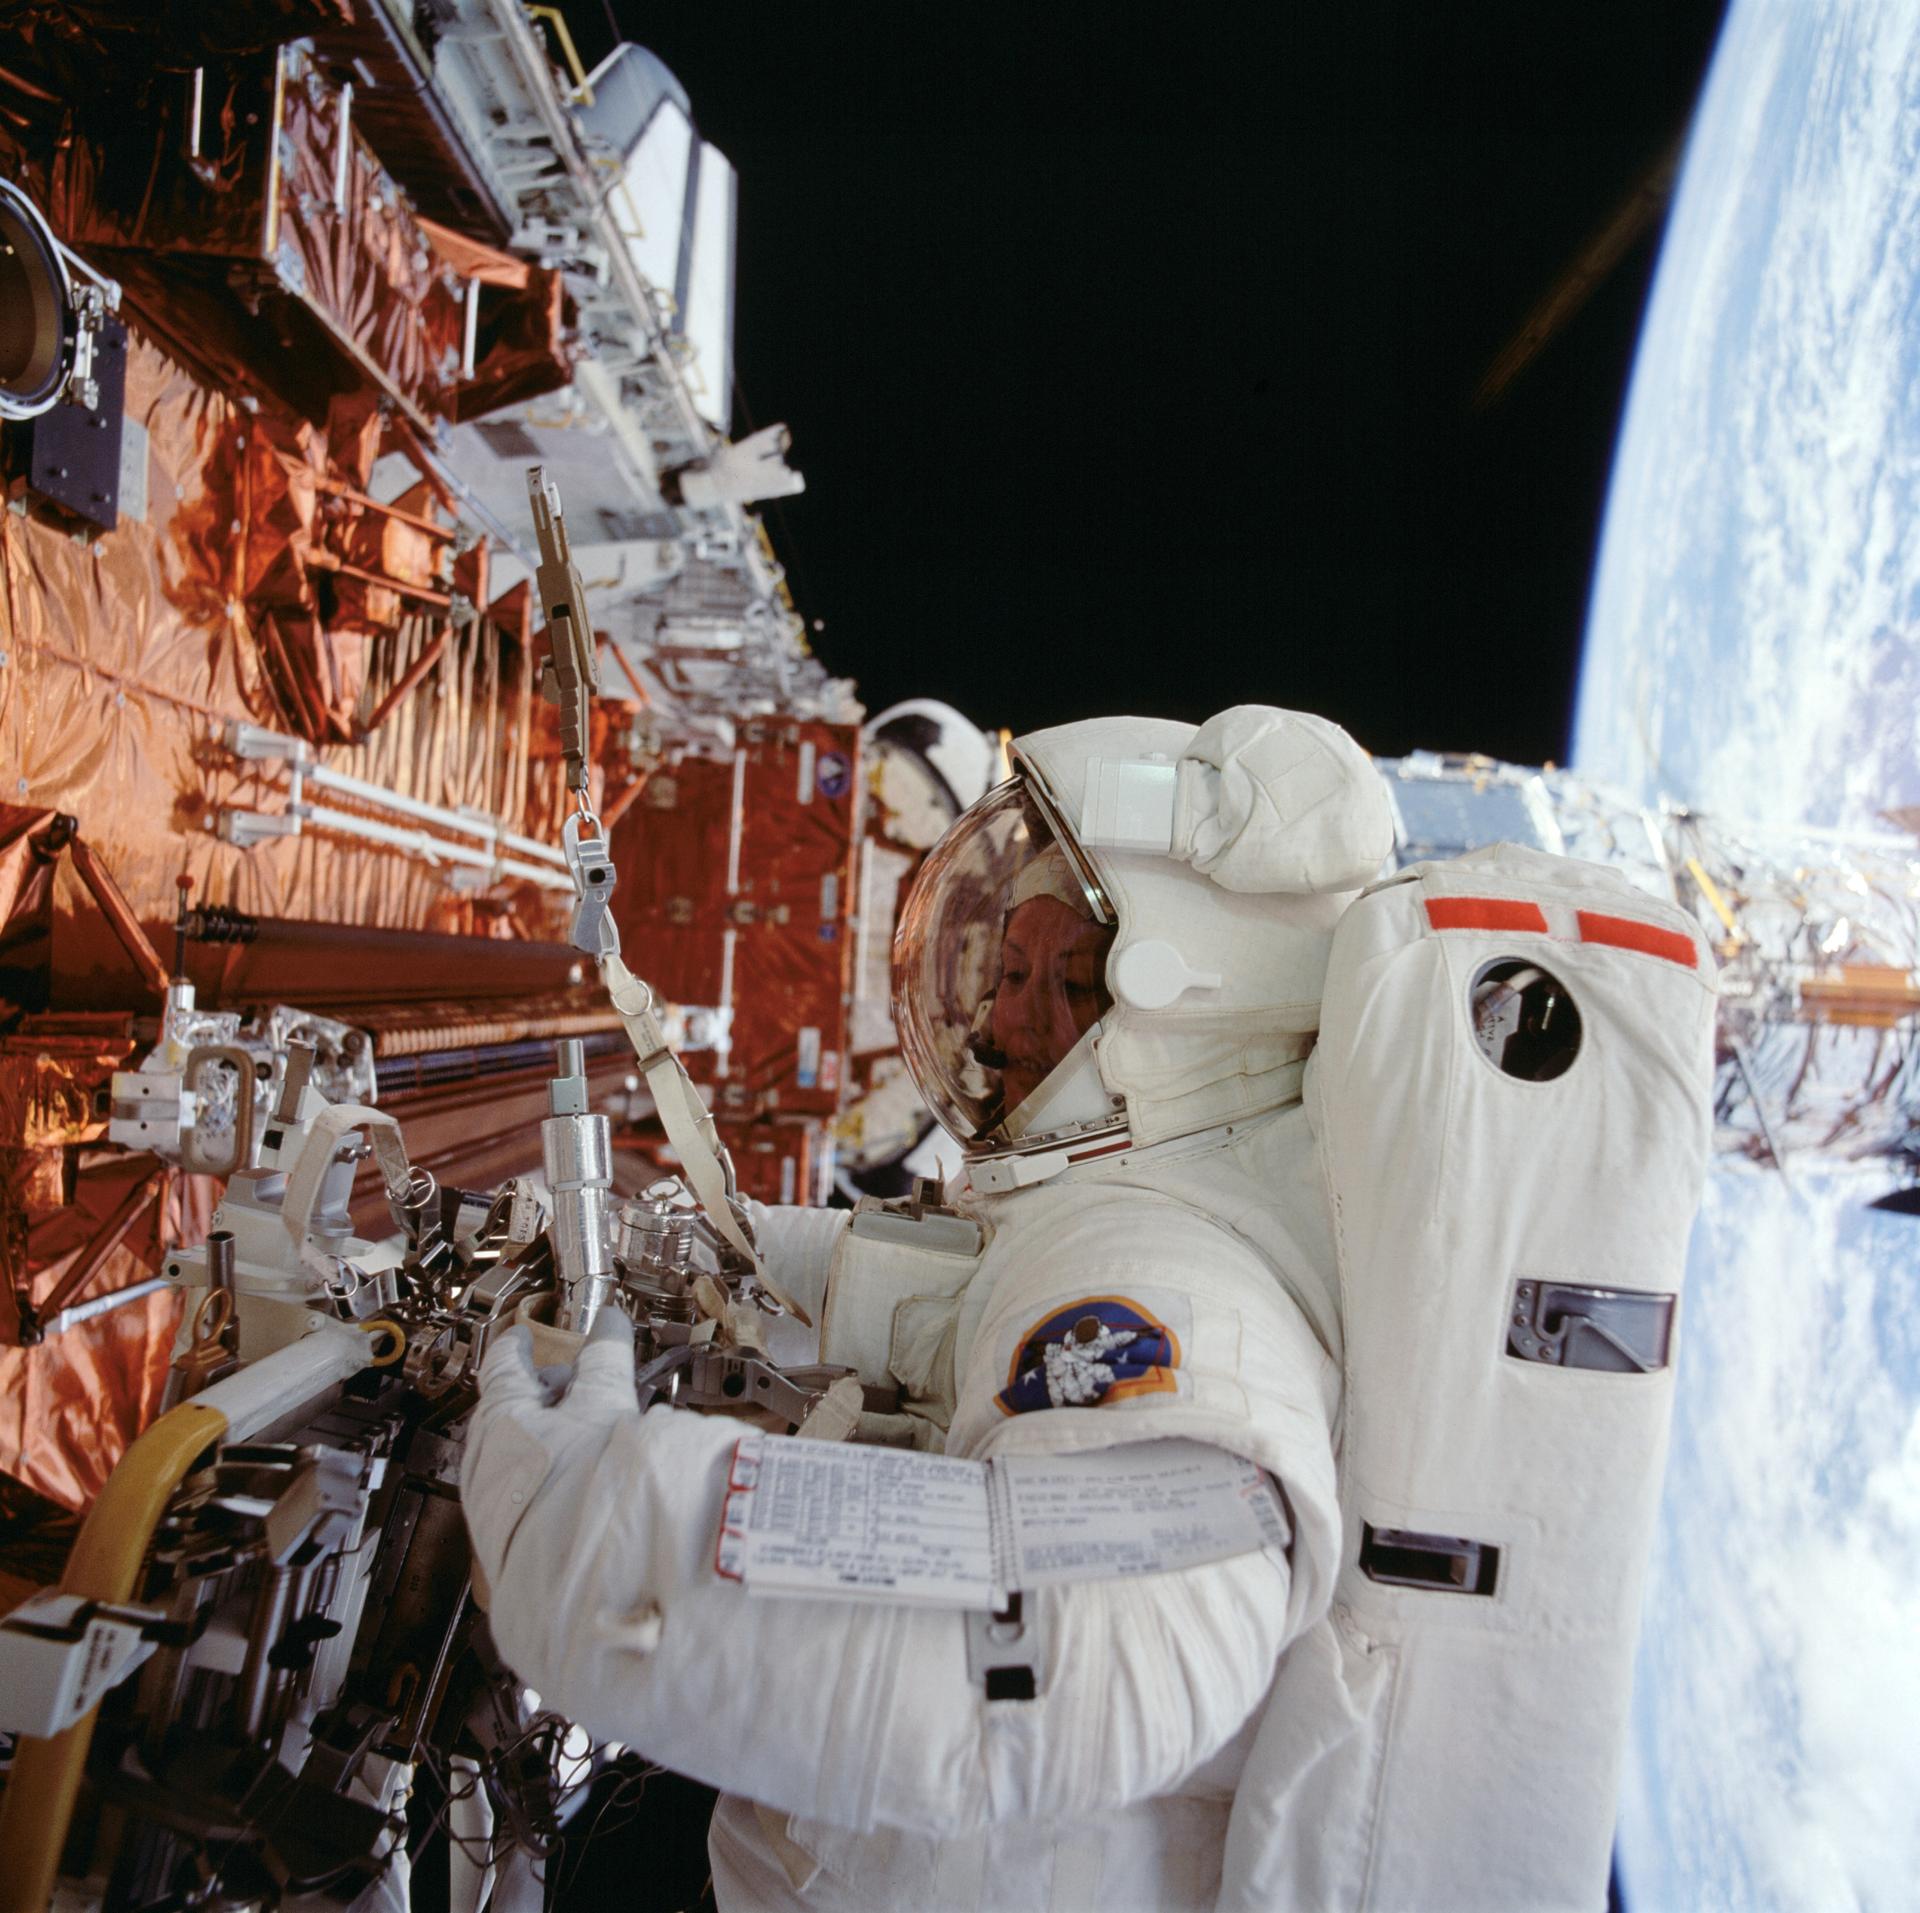 An astronaut at one of the gold covered cargo bay carriers with the earth and Hubble off to the right.